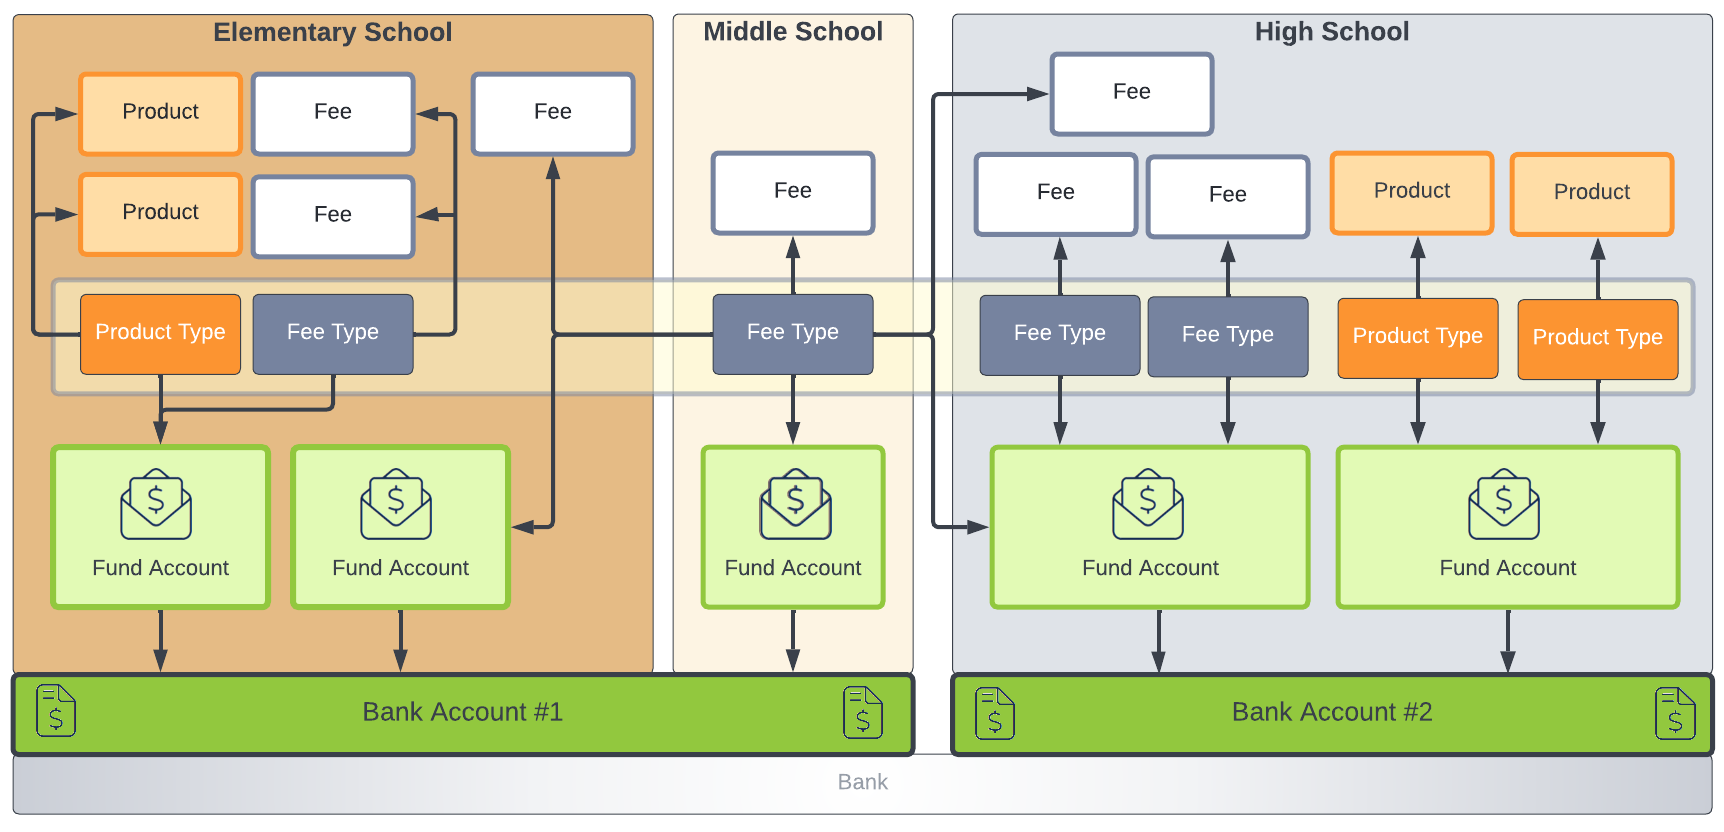 Screenshot showing the relationship between the tools Online Payments, School Store, and Fees.